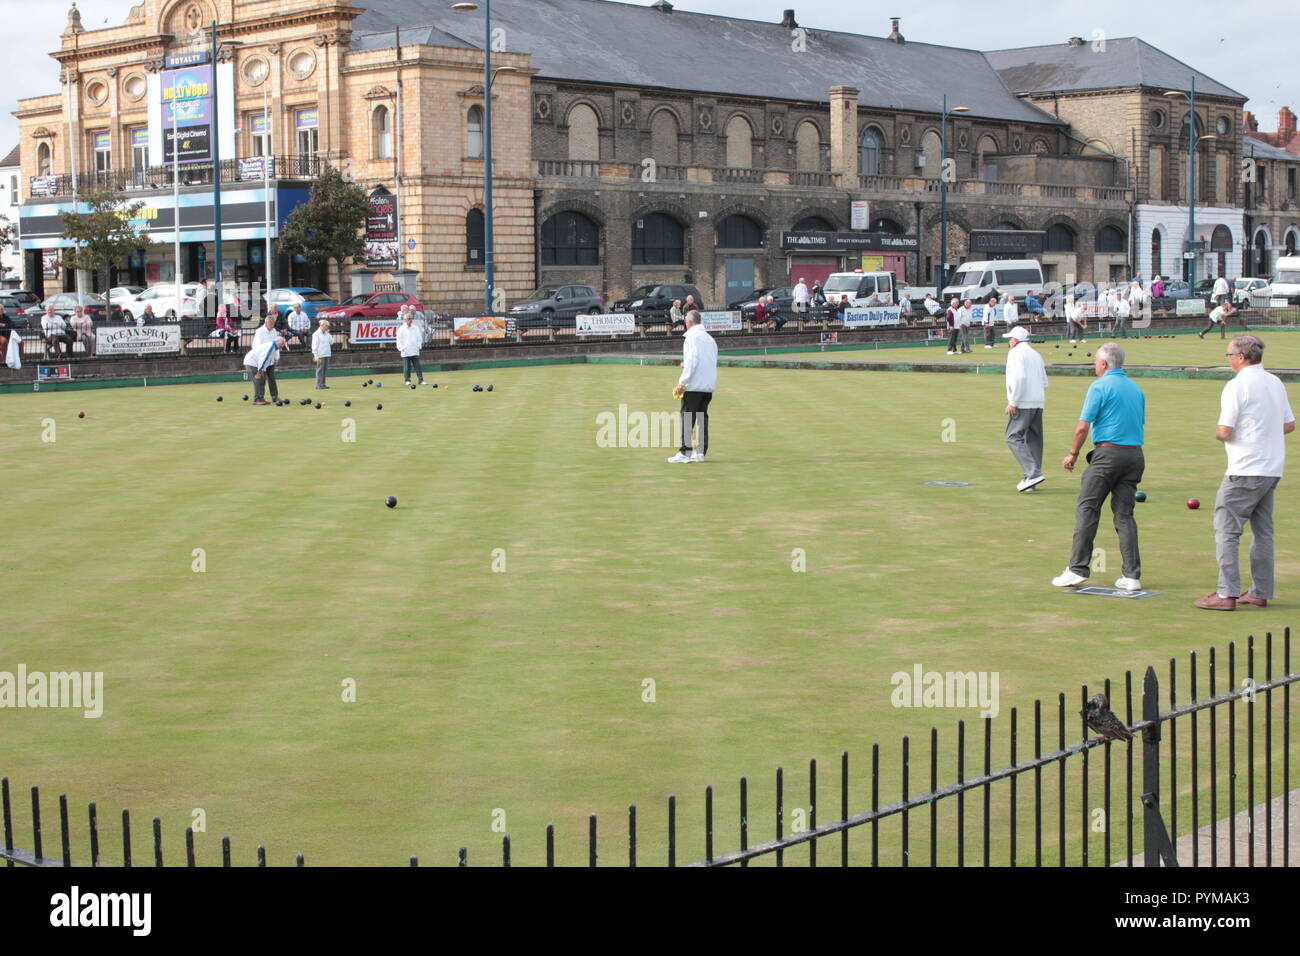 People lawn bowls Stock Photo